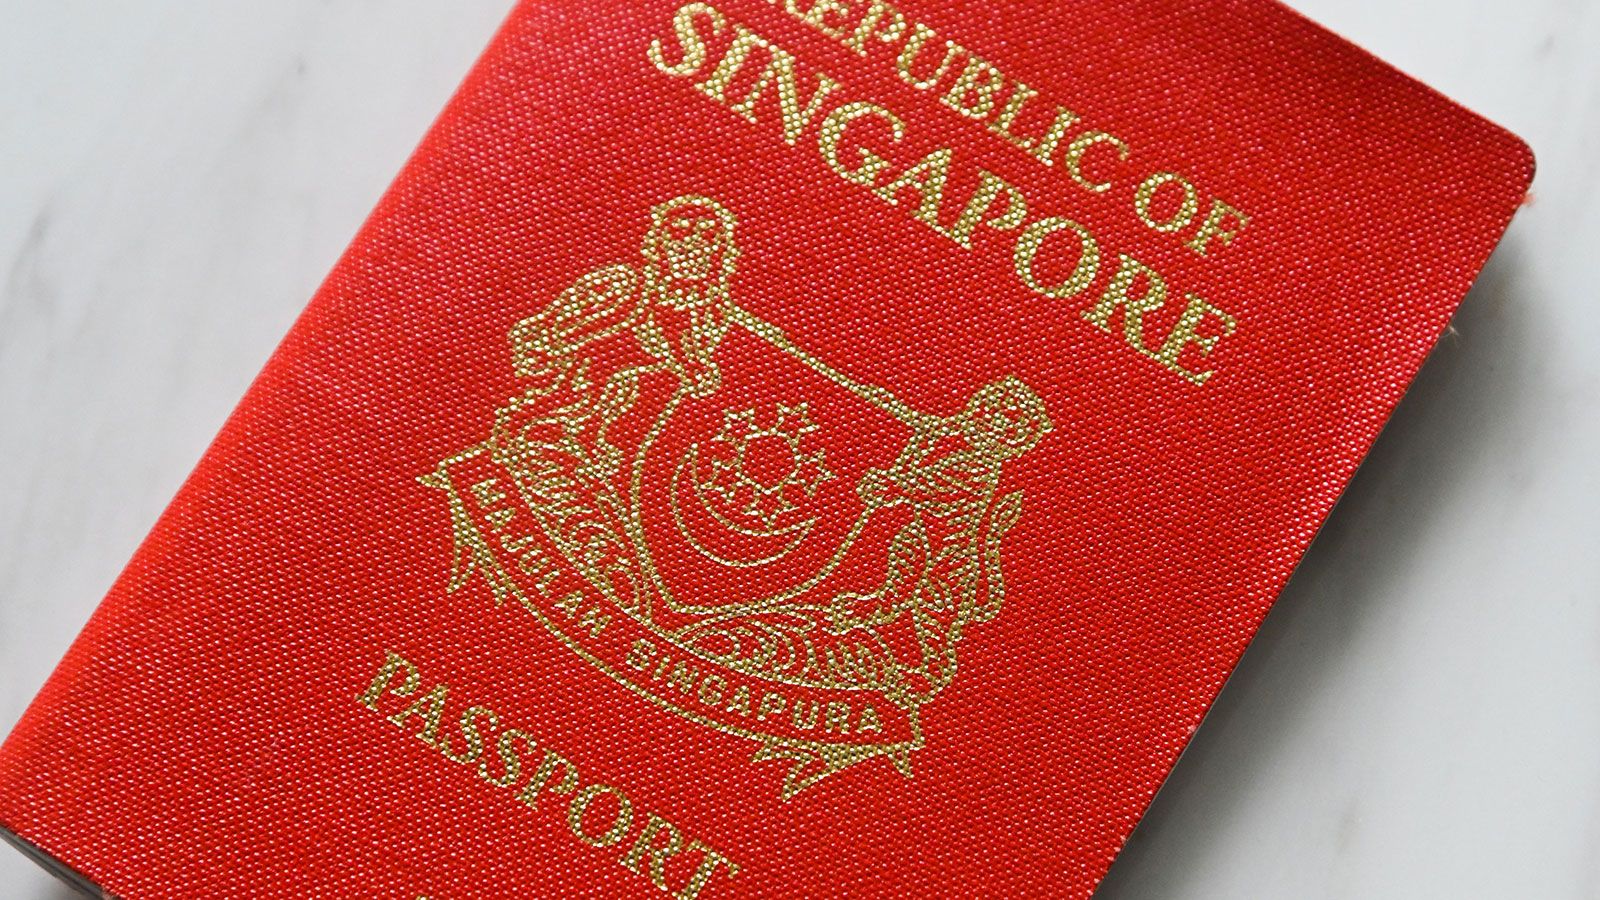 The world's most powerful passports for 2023